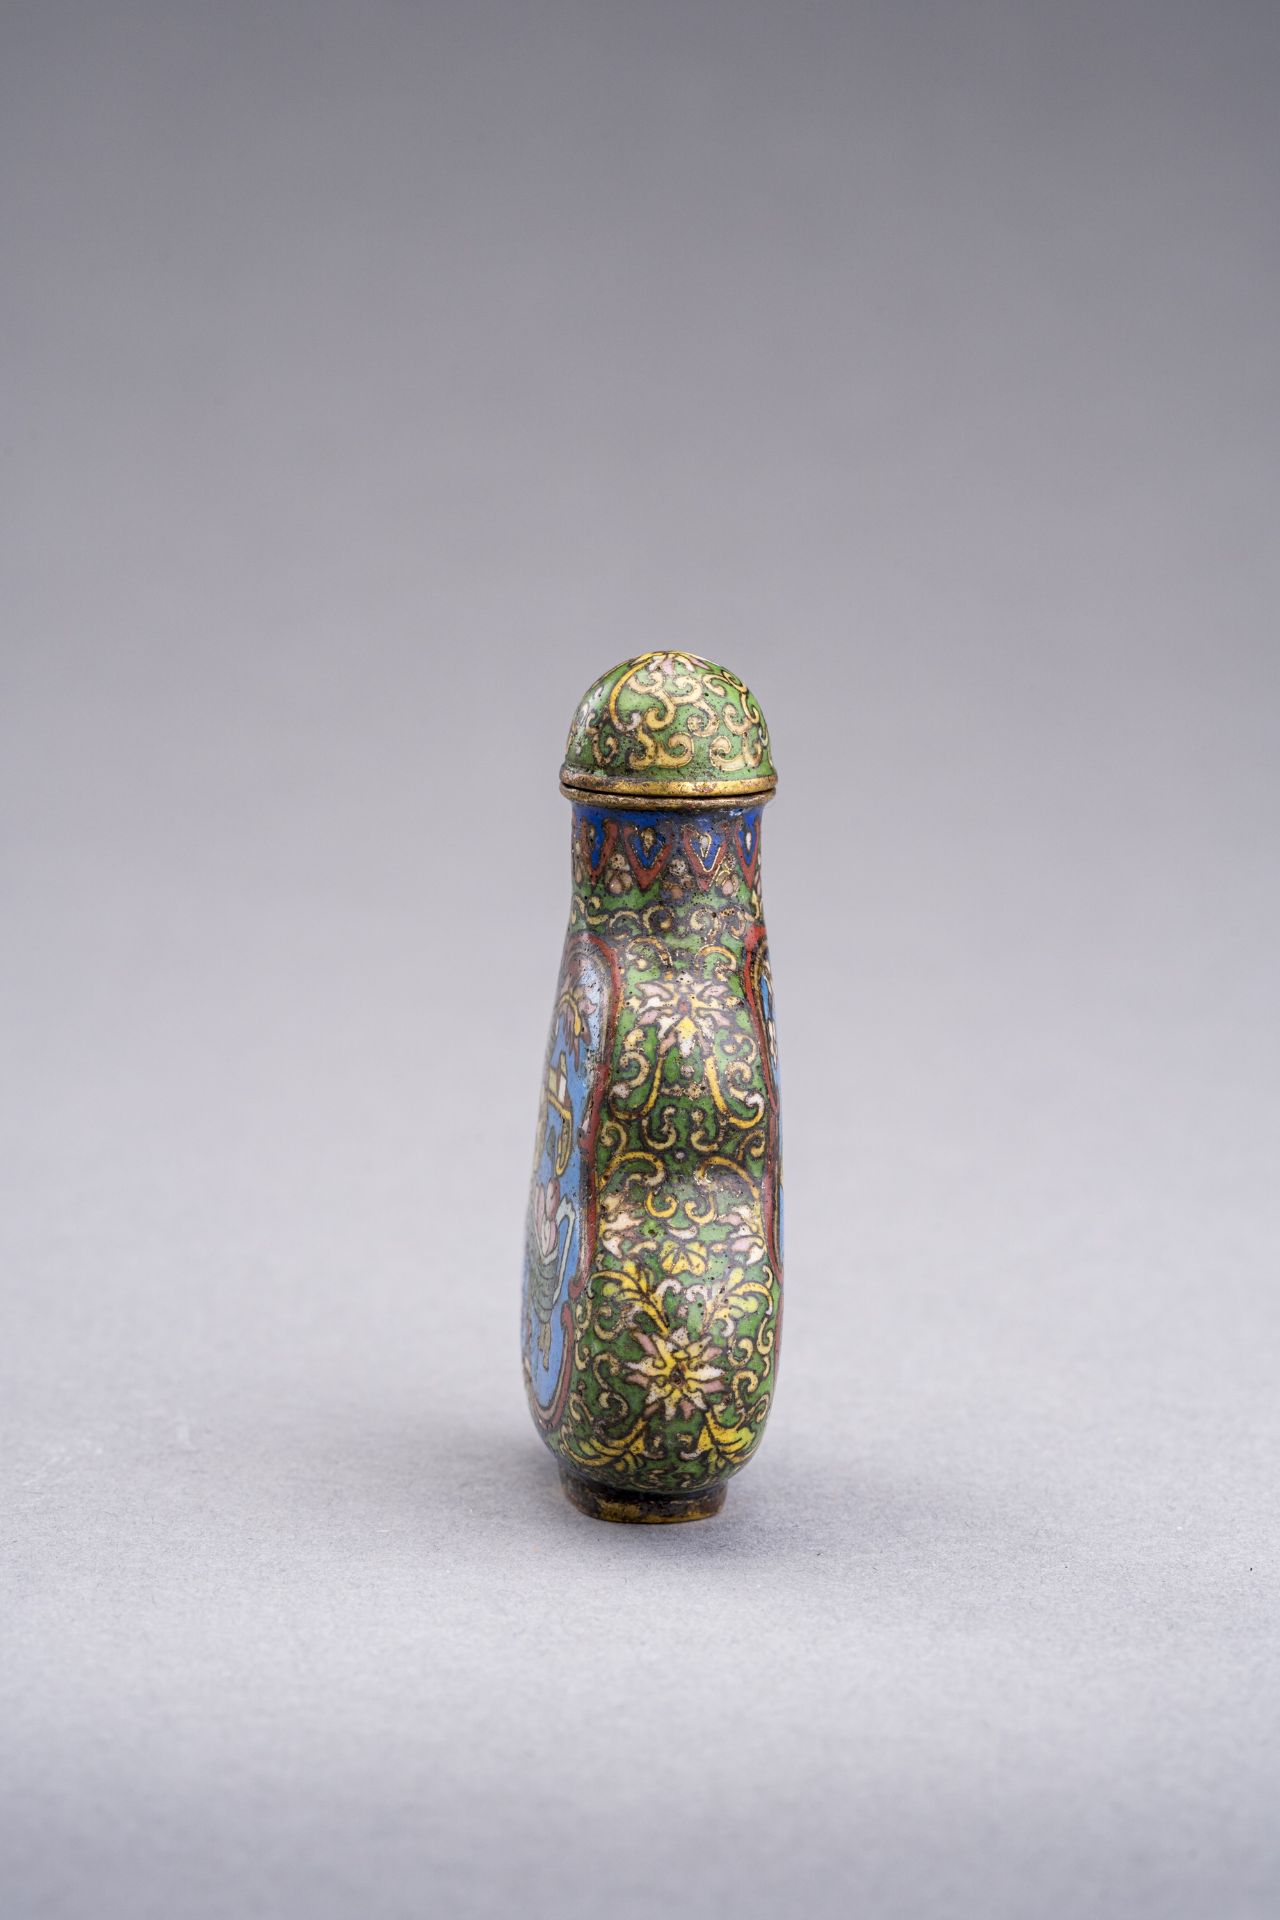 A DOUBLE-GOURD CLOISSONNE SNUFF BOTTLE, QING DYNASTY - Image 4 of 6